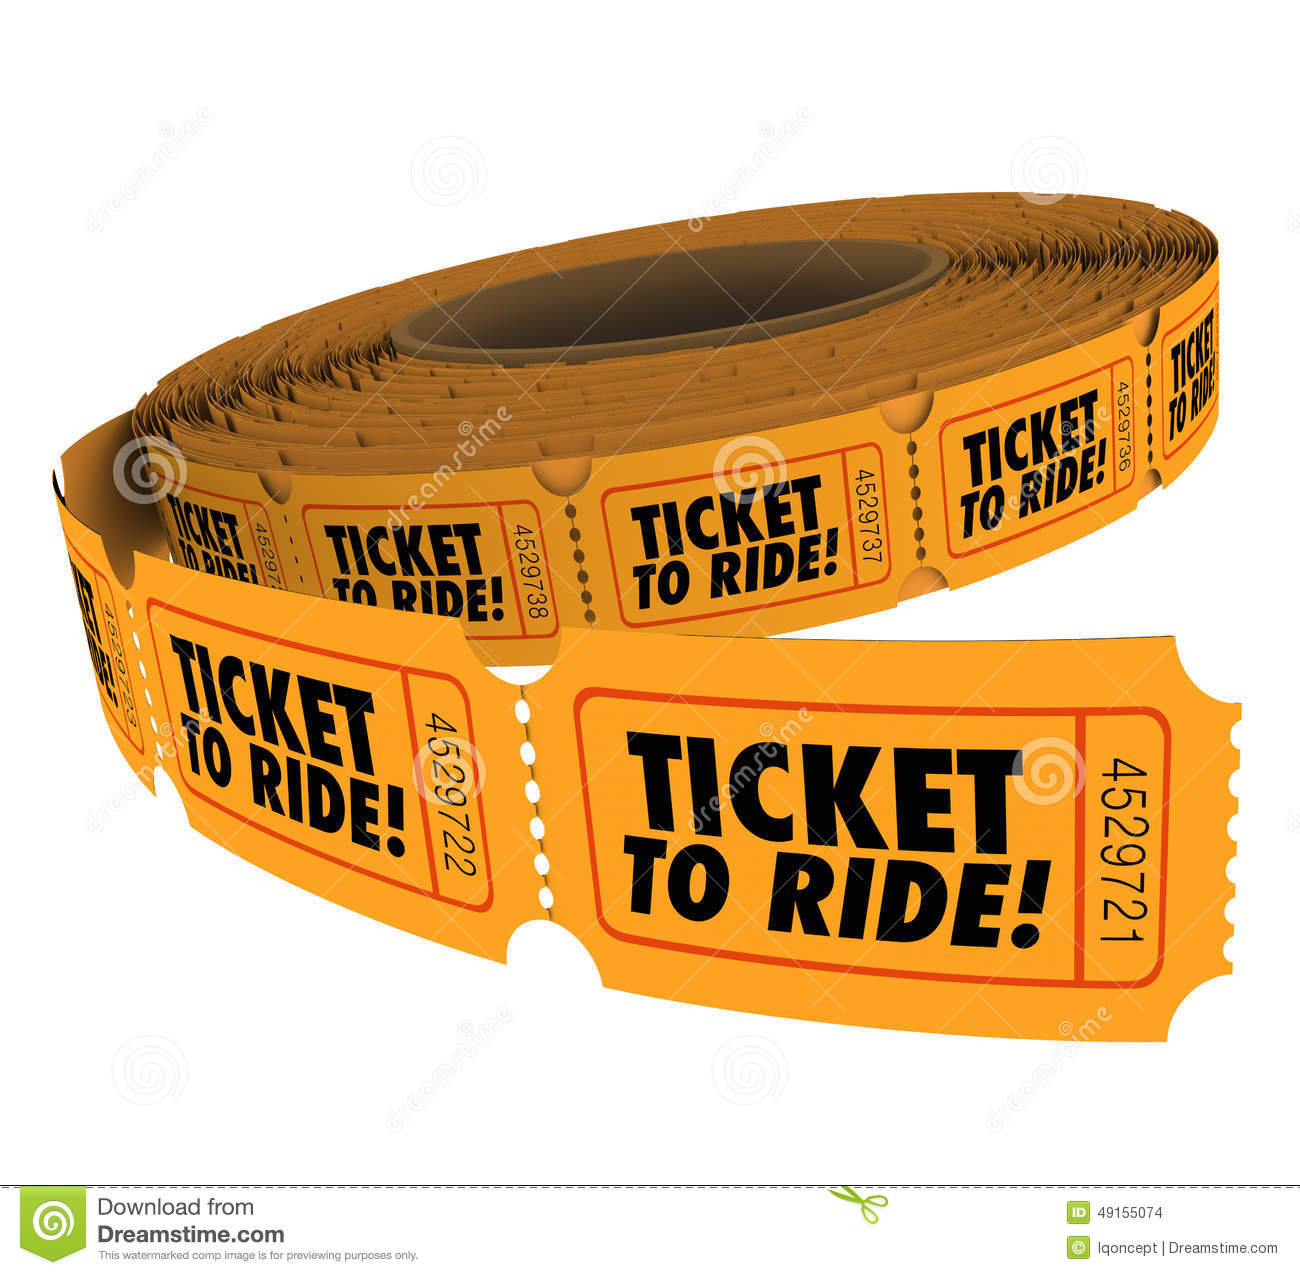 Ticket To Ride Words On A Roll Of Orange Paper Tickets Passes Or